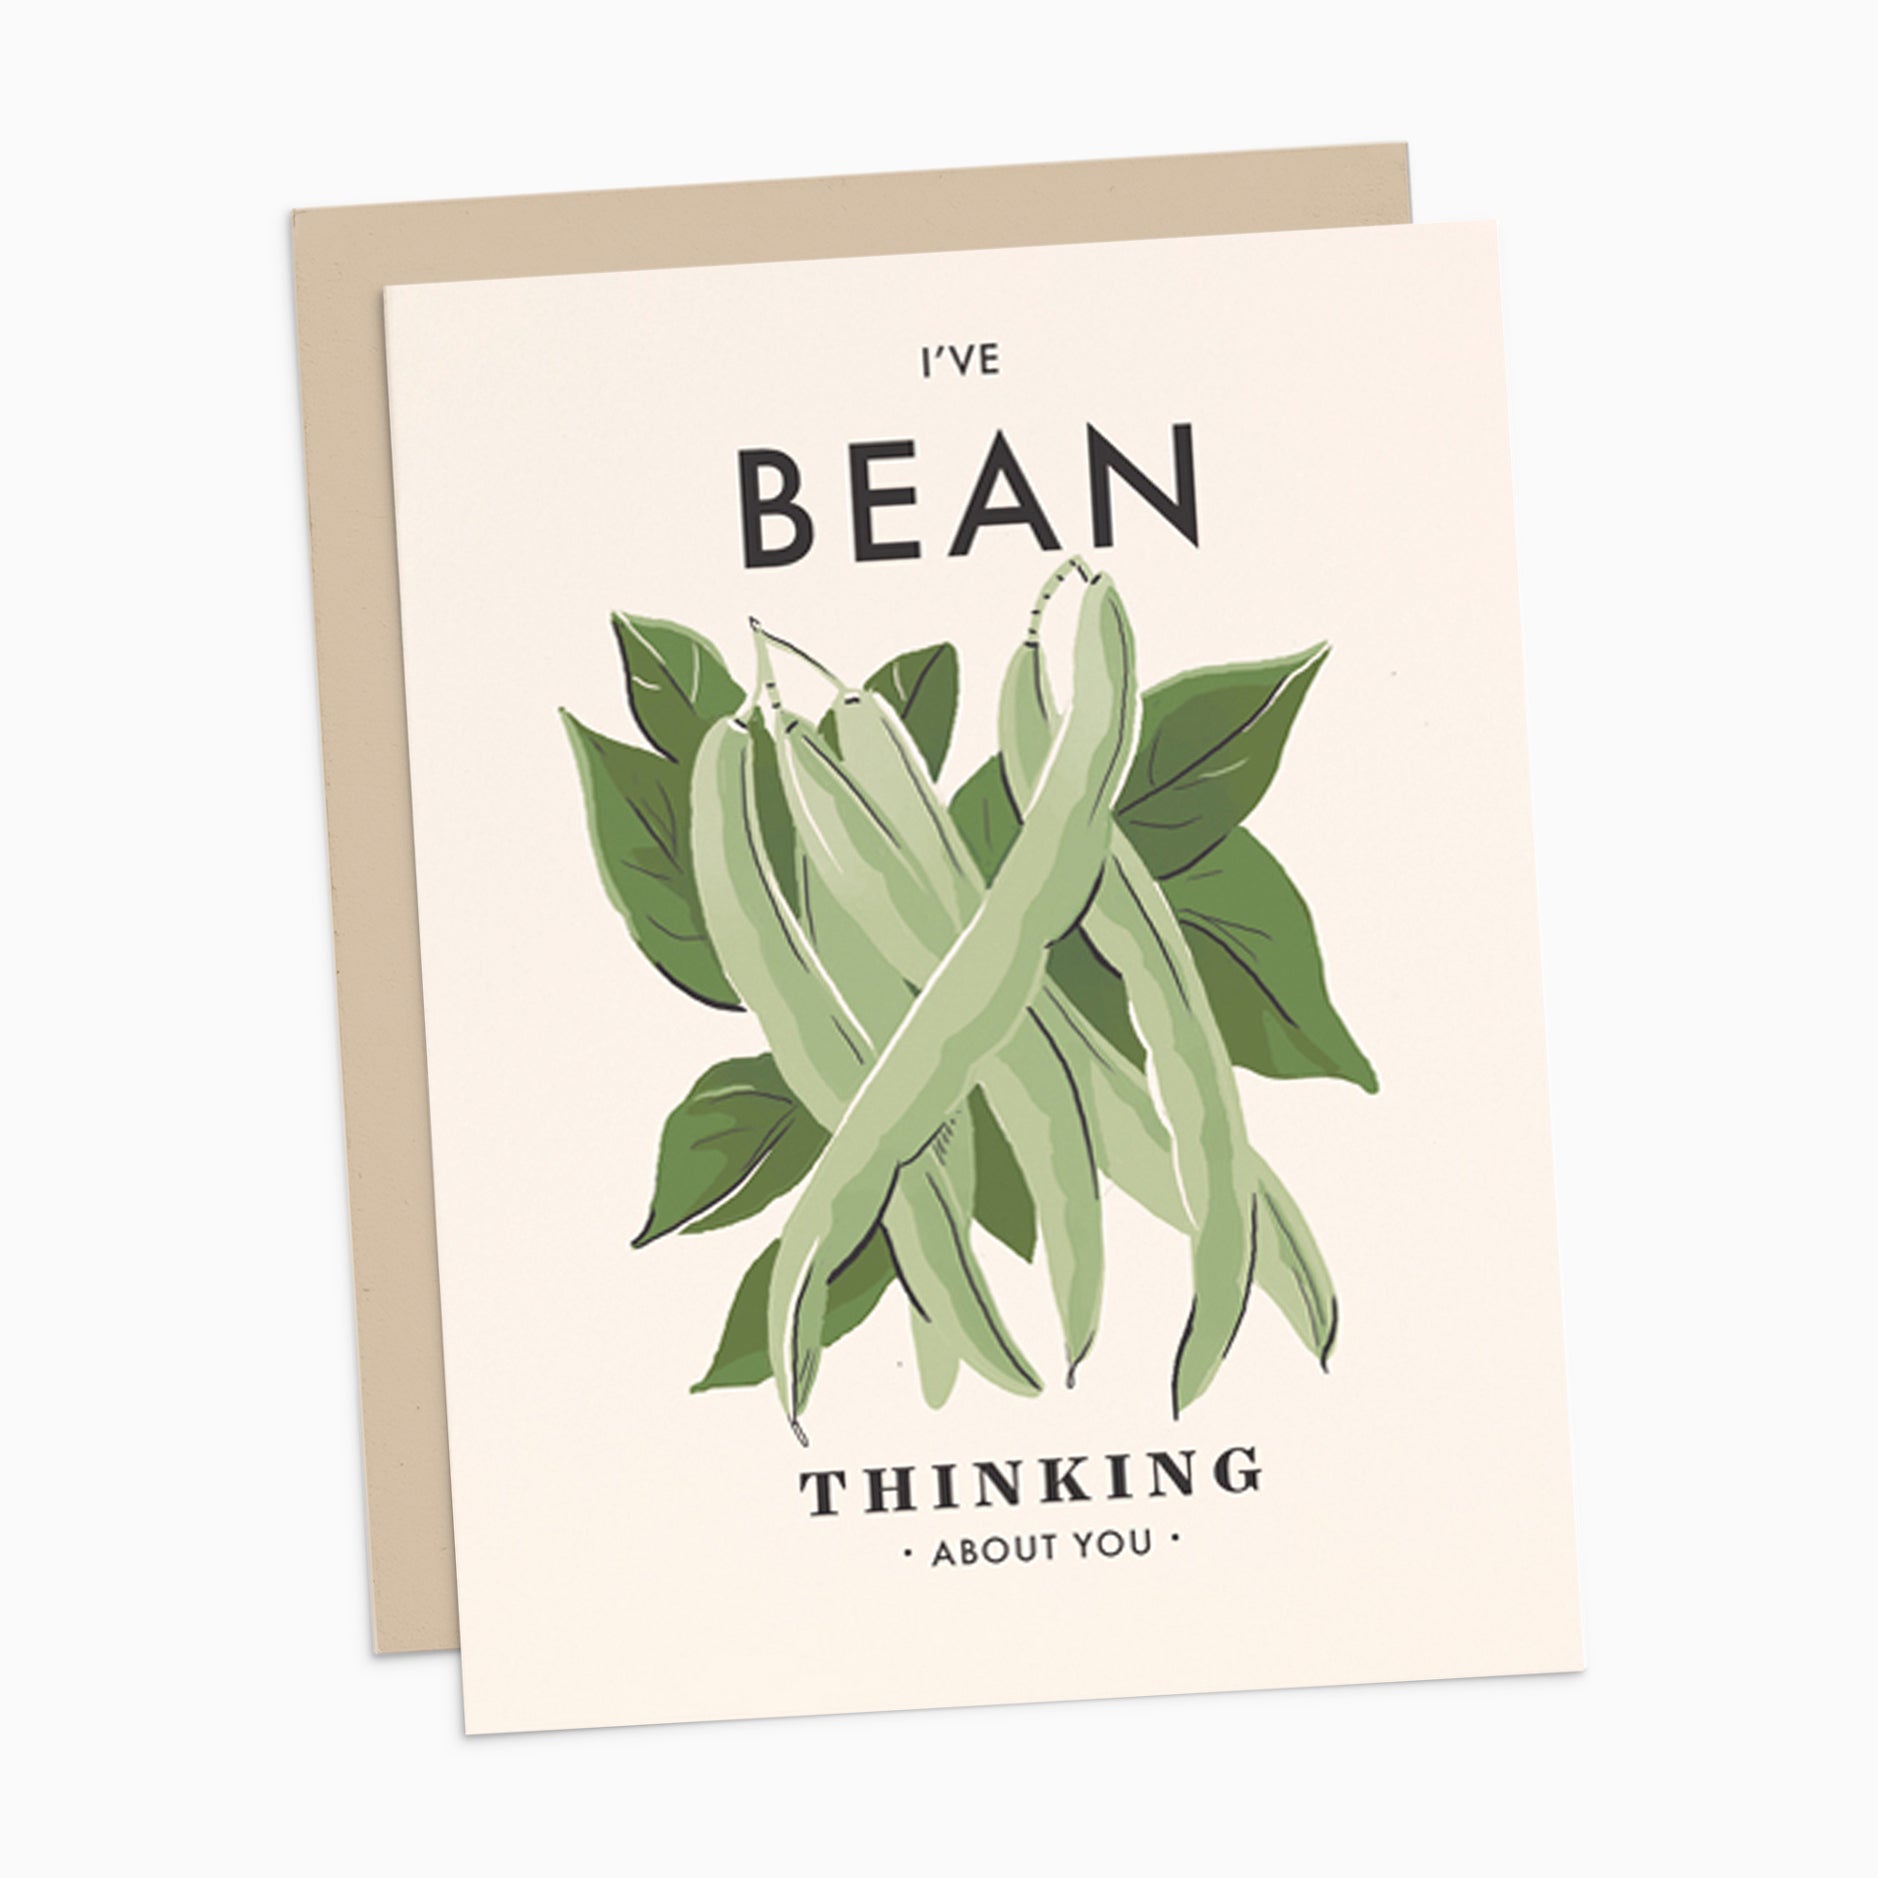 Illustrated 'Thinking About You' card on warm white premium cardstock, featuring a bunch of beans and the text 'I've Bean Thinking About You.'